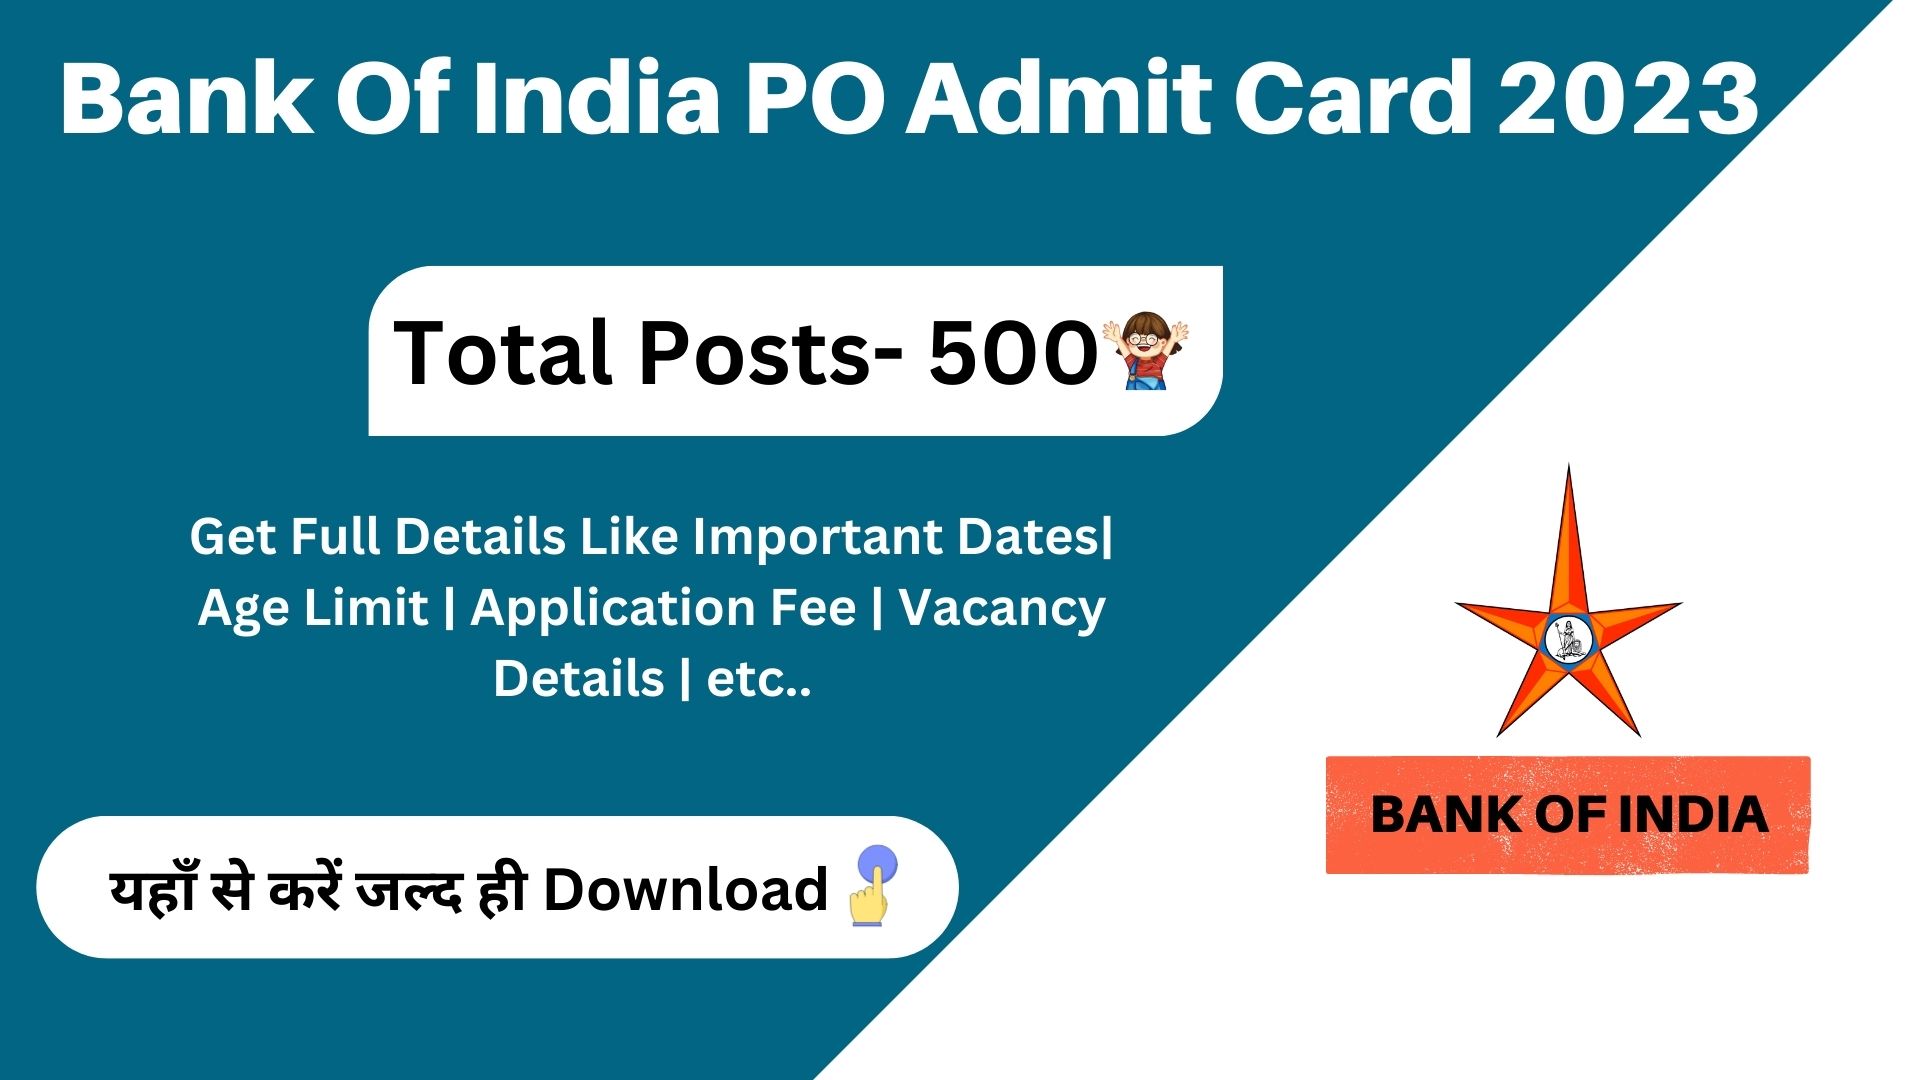 Bank Of India PO Admit Card 2023